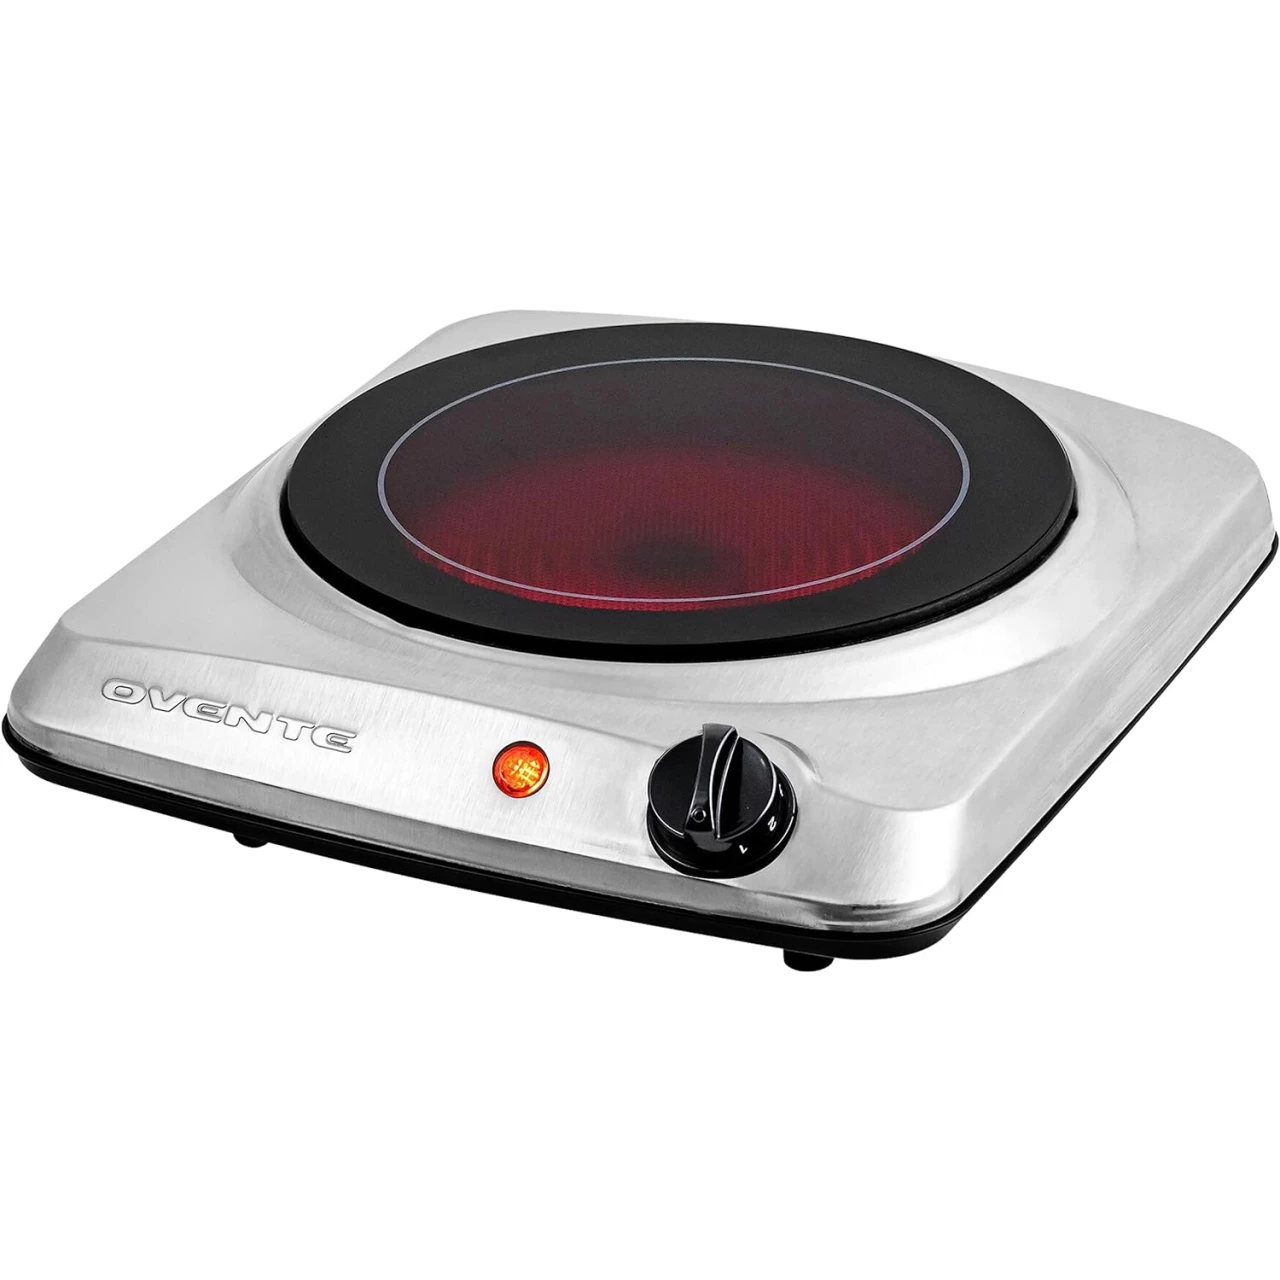 OVENTE Electric Single Infrared Burner 7 Inch Ceramic Glass Hot Plate Cooktop